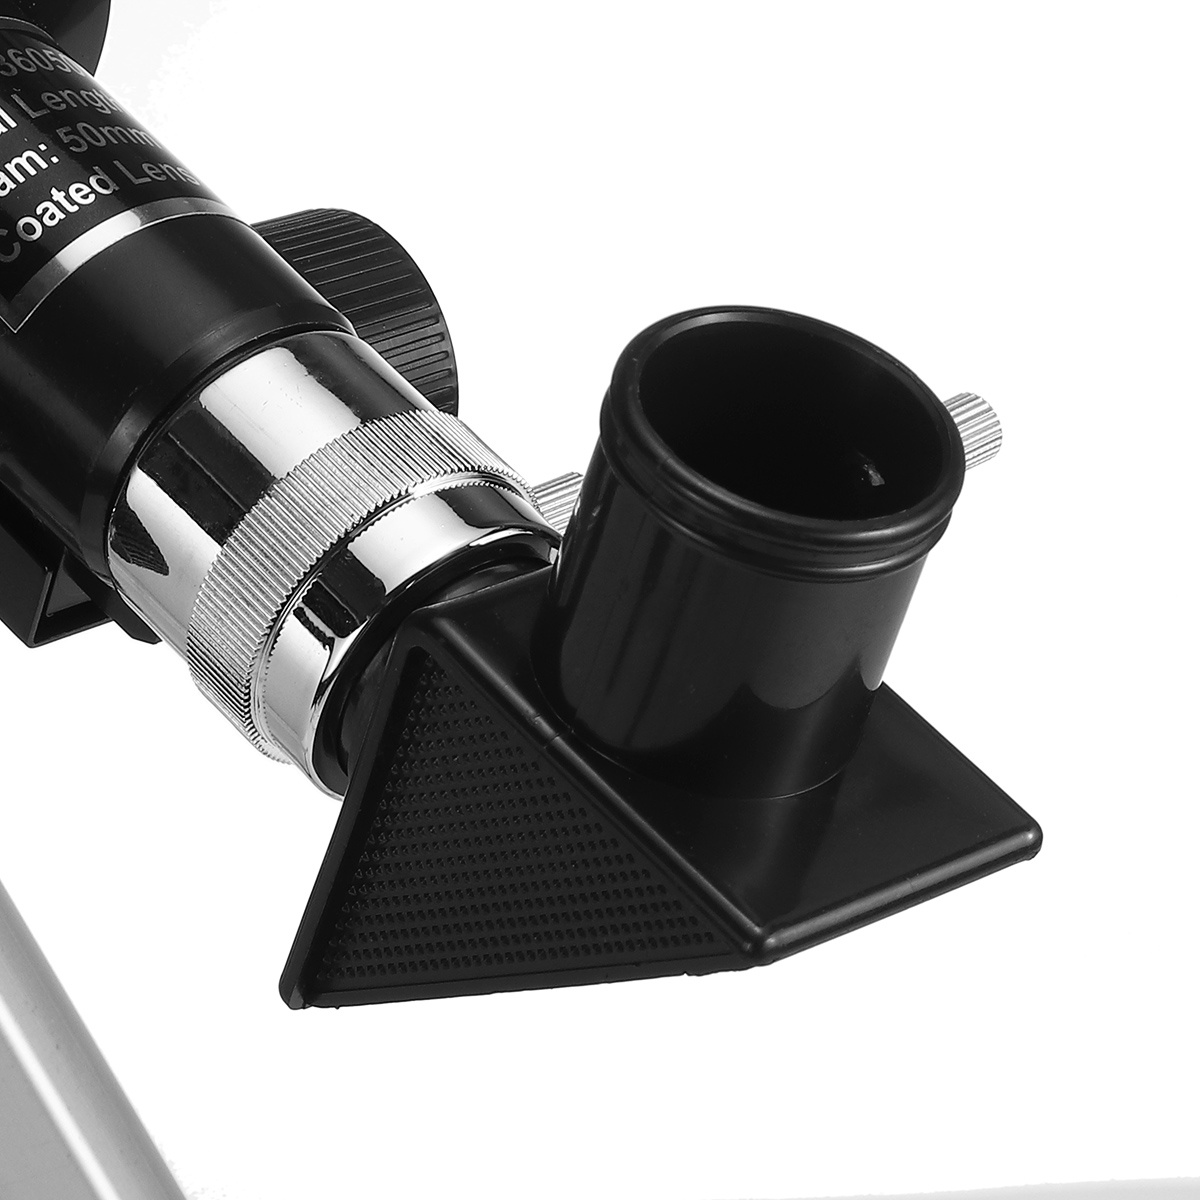 90x-Magnification-Astronomical-Telescope-Clear-Image-with-Remote-Control-and-Camera-Rod-for-Observe--1851121-8